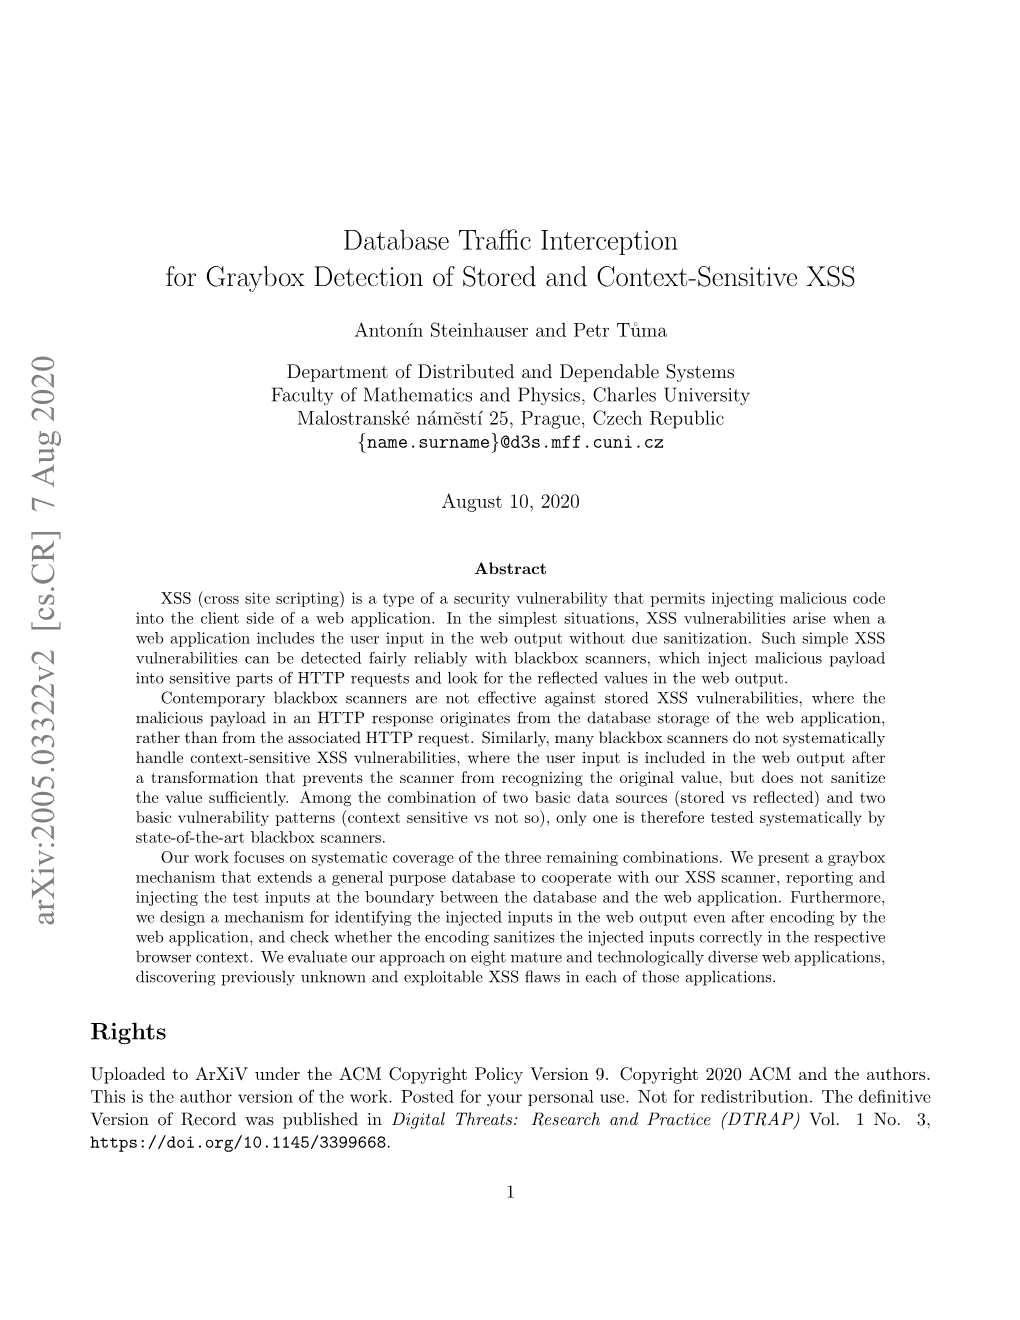 Database Traffic Interception for Graybox Detection of Stored And